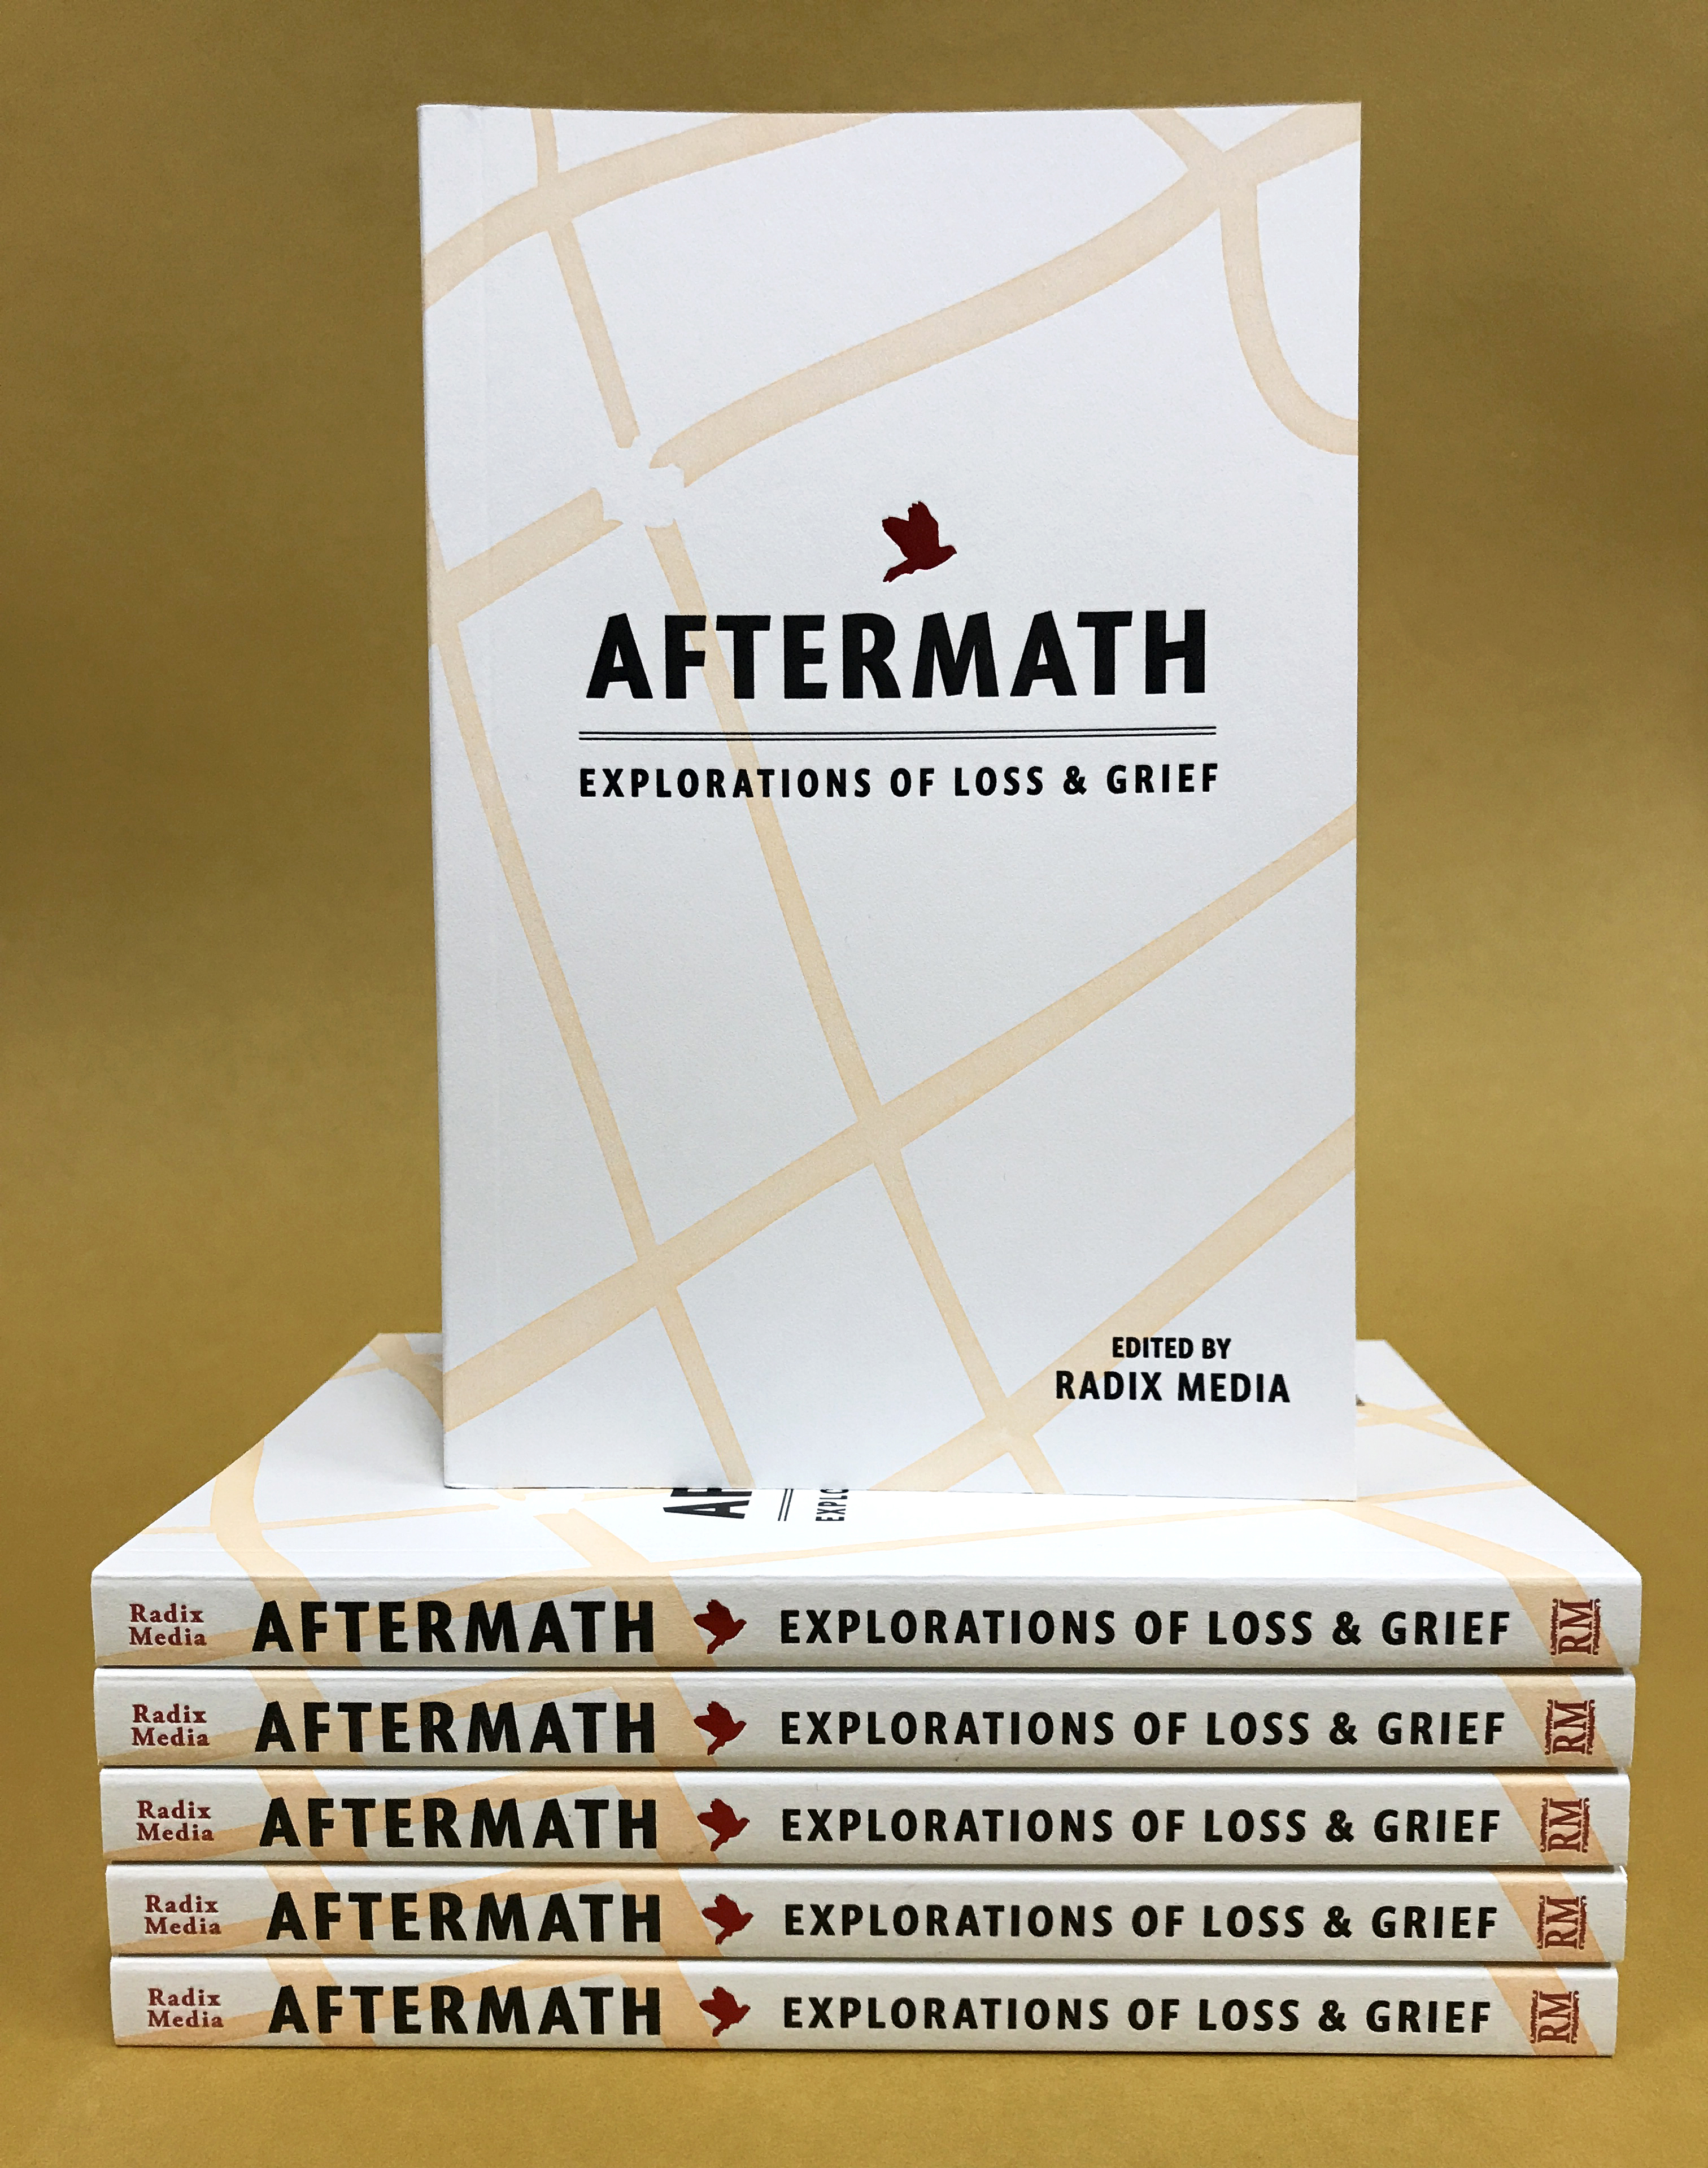 Independent Publishing - AFTERMATH: Explorations of Loss & Grief